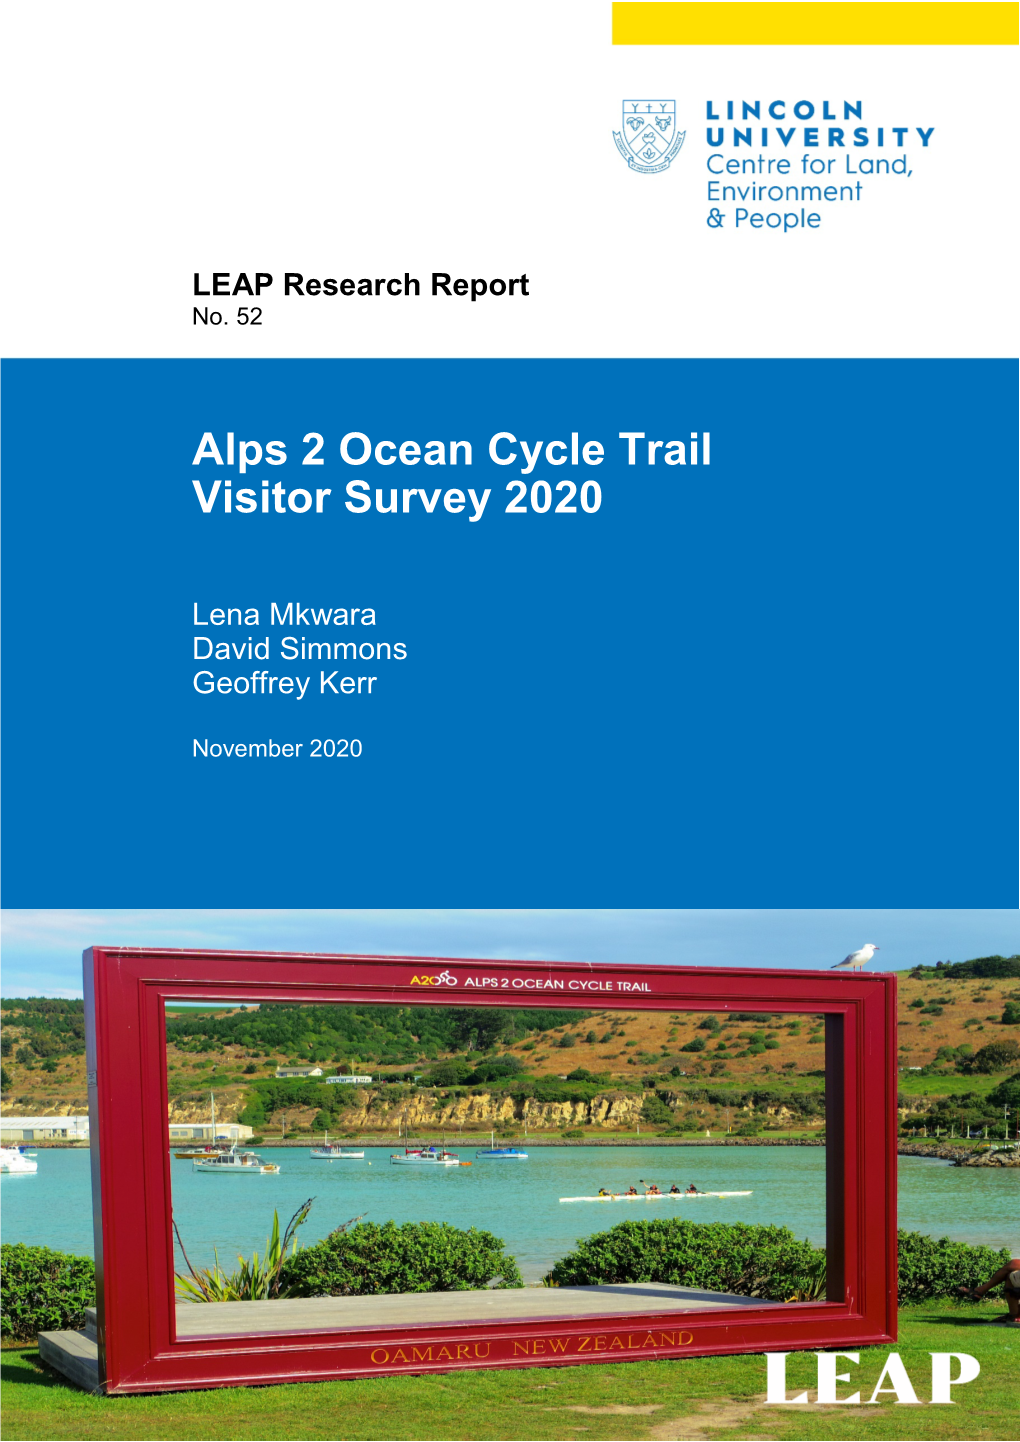 Alps 2 Ocean Cycle Trail Visitor Survey 2020